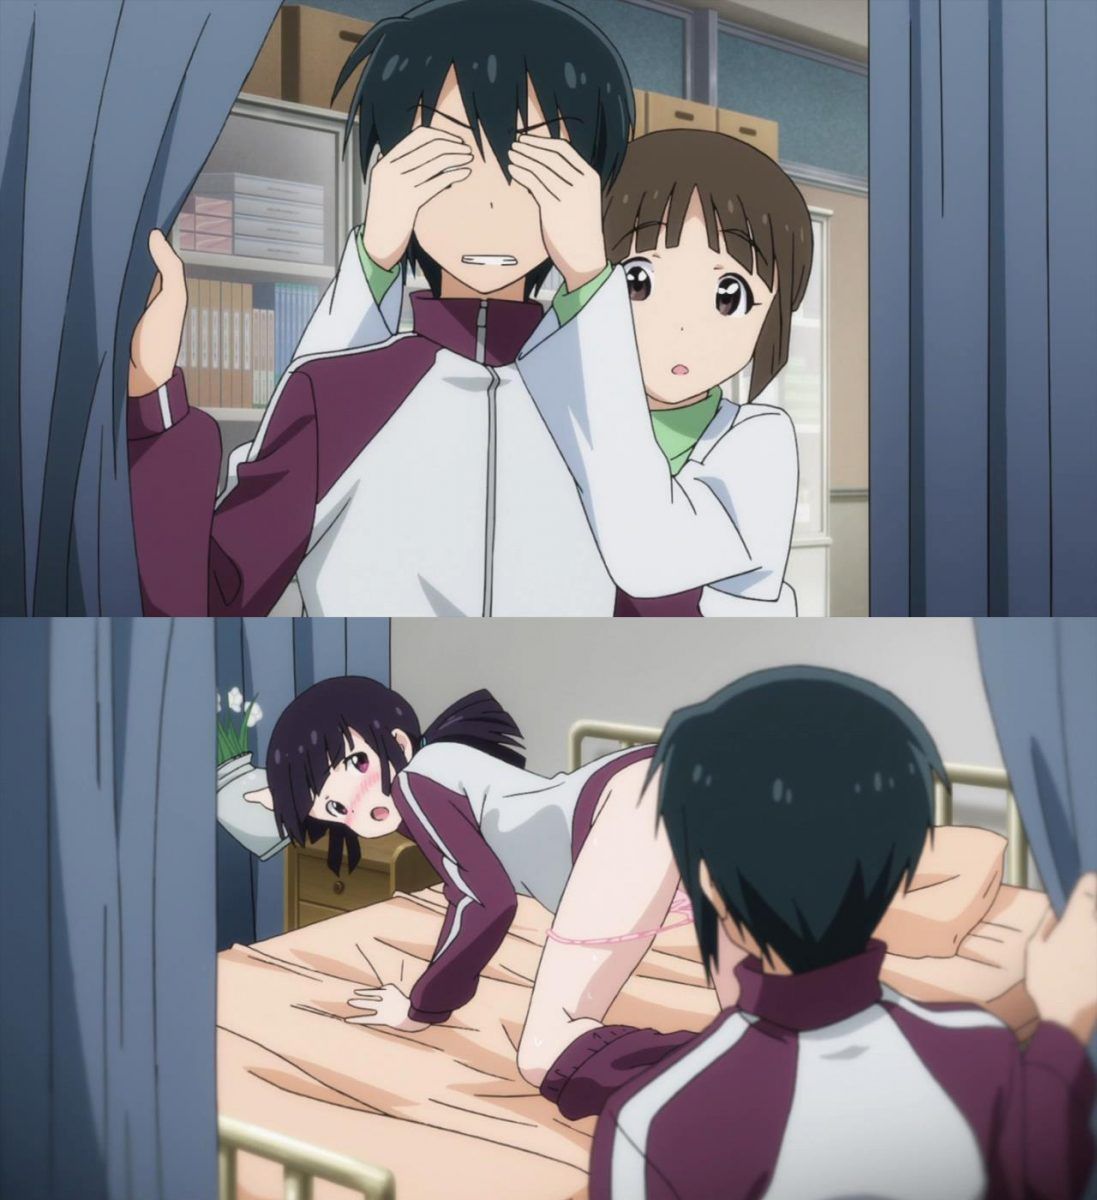 Things that happen in anime: sexy accidents